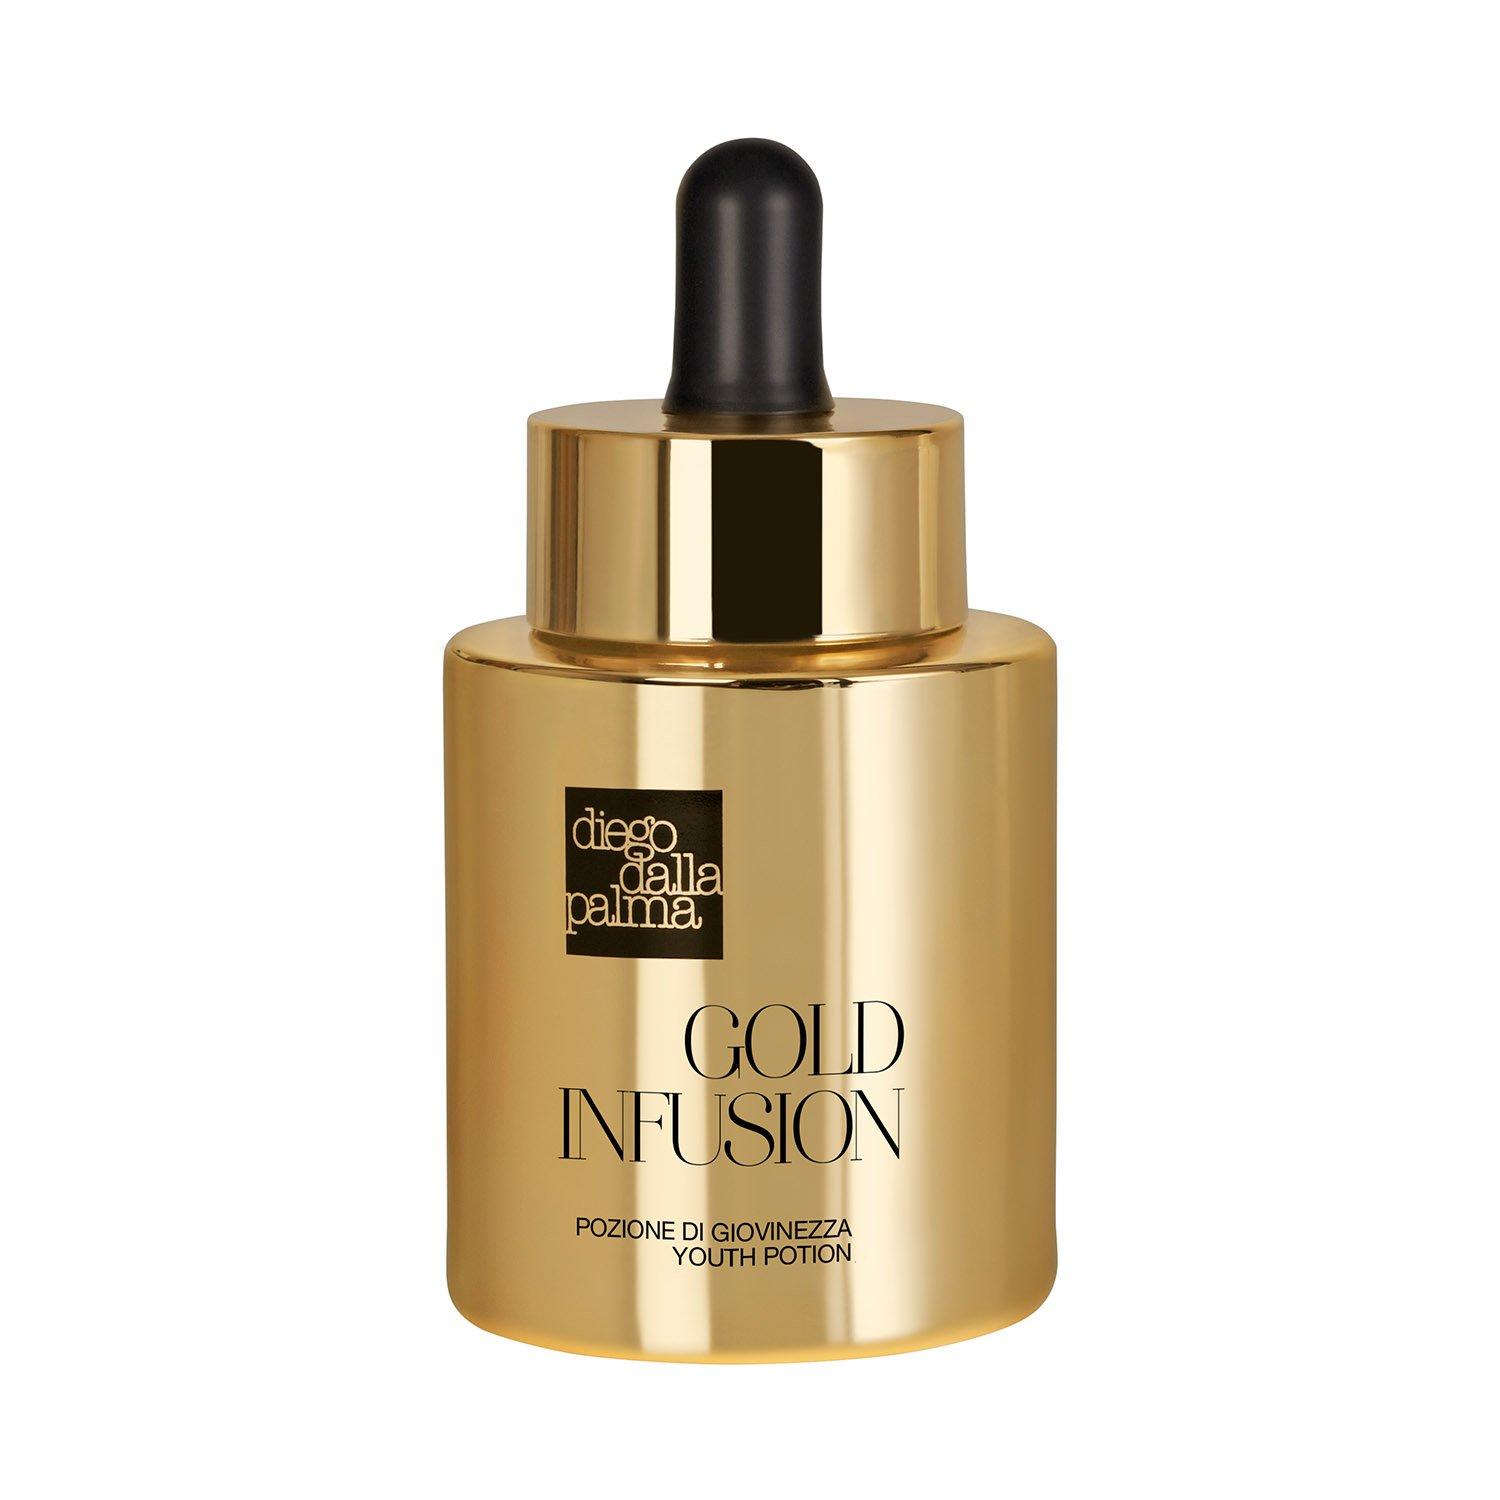 Image of diego dalla palma Gold Infusion Youth Potion - 30ml